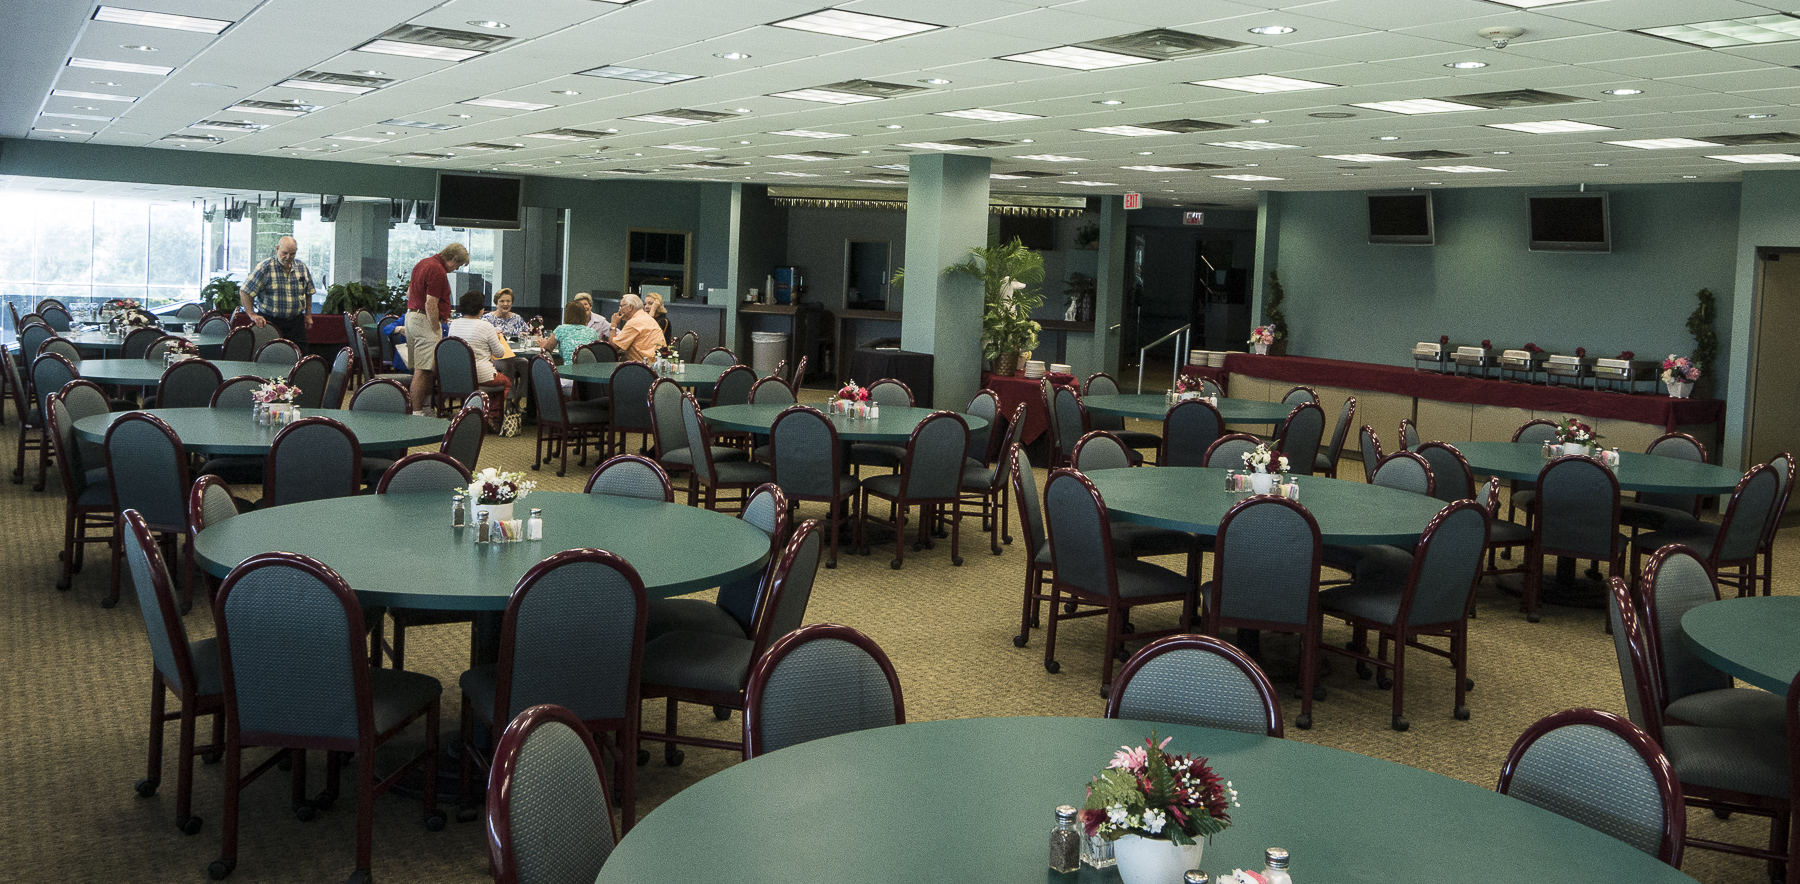 Interior of mezzanine at Orange Park Kennel Club.  Tables will have table cloths and birthday decorations.  Buffet table is on the right rear.